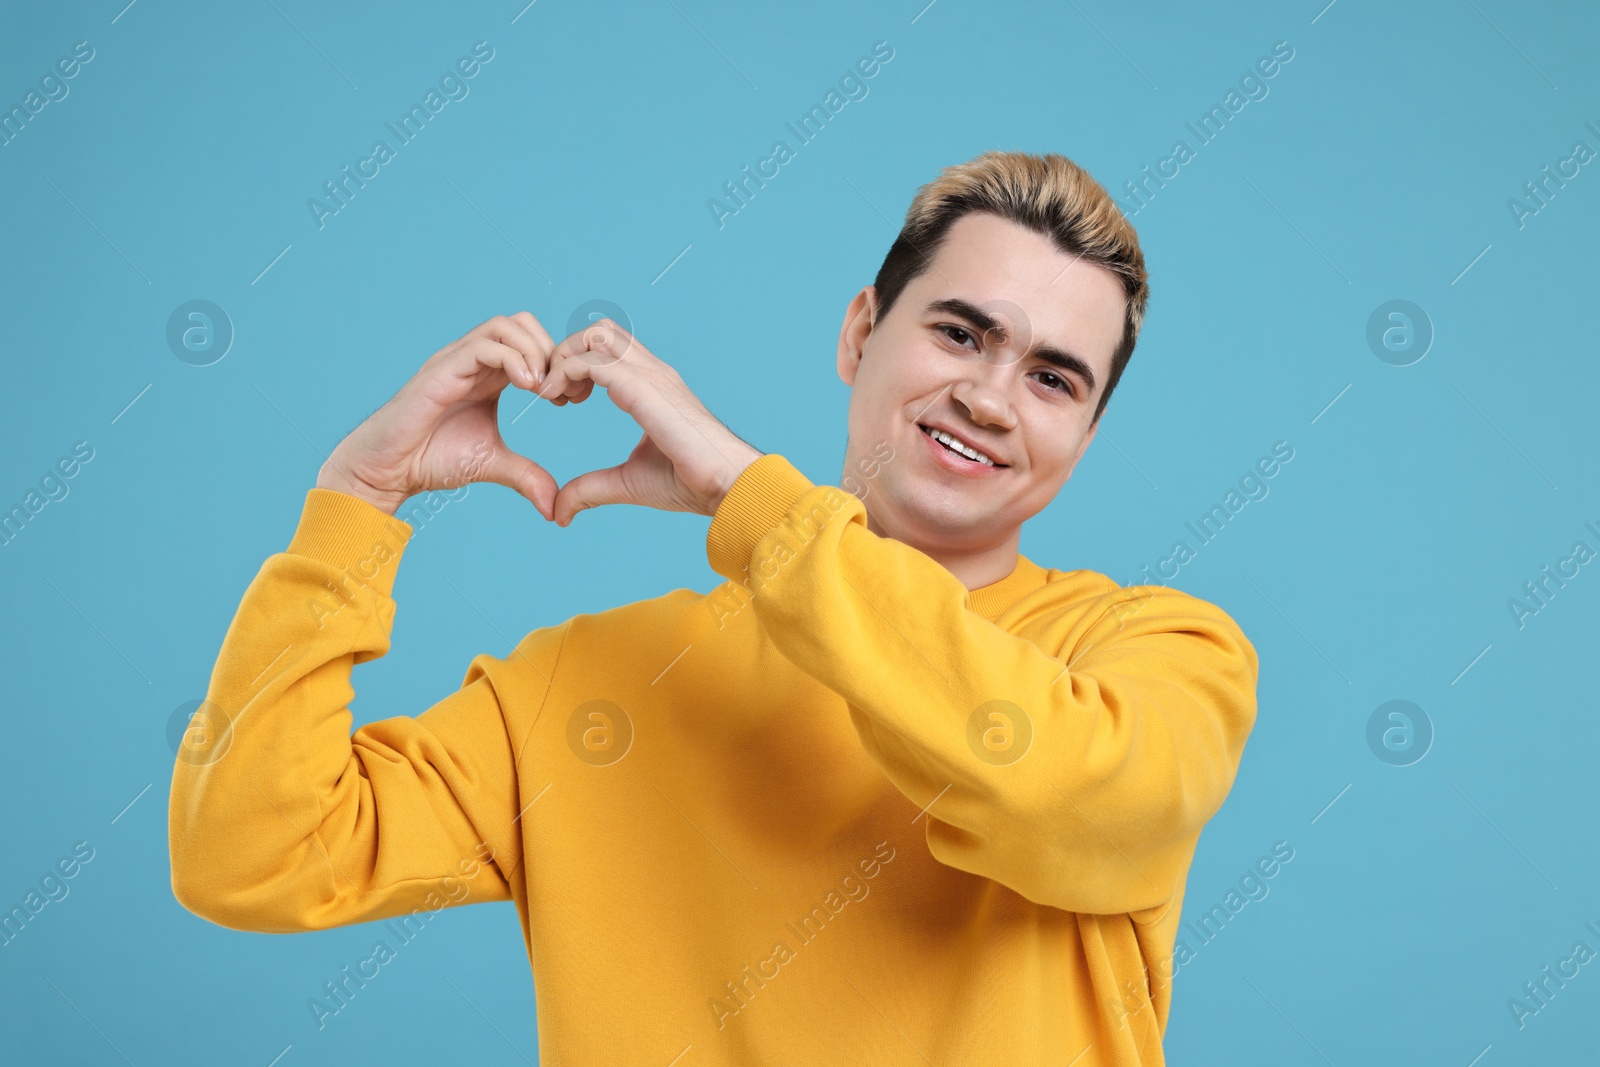 Photo of Young man showing heart gesture with hands on light blue background